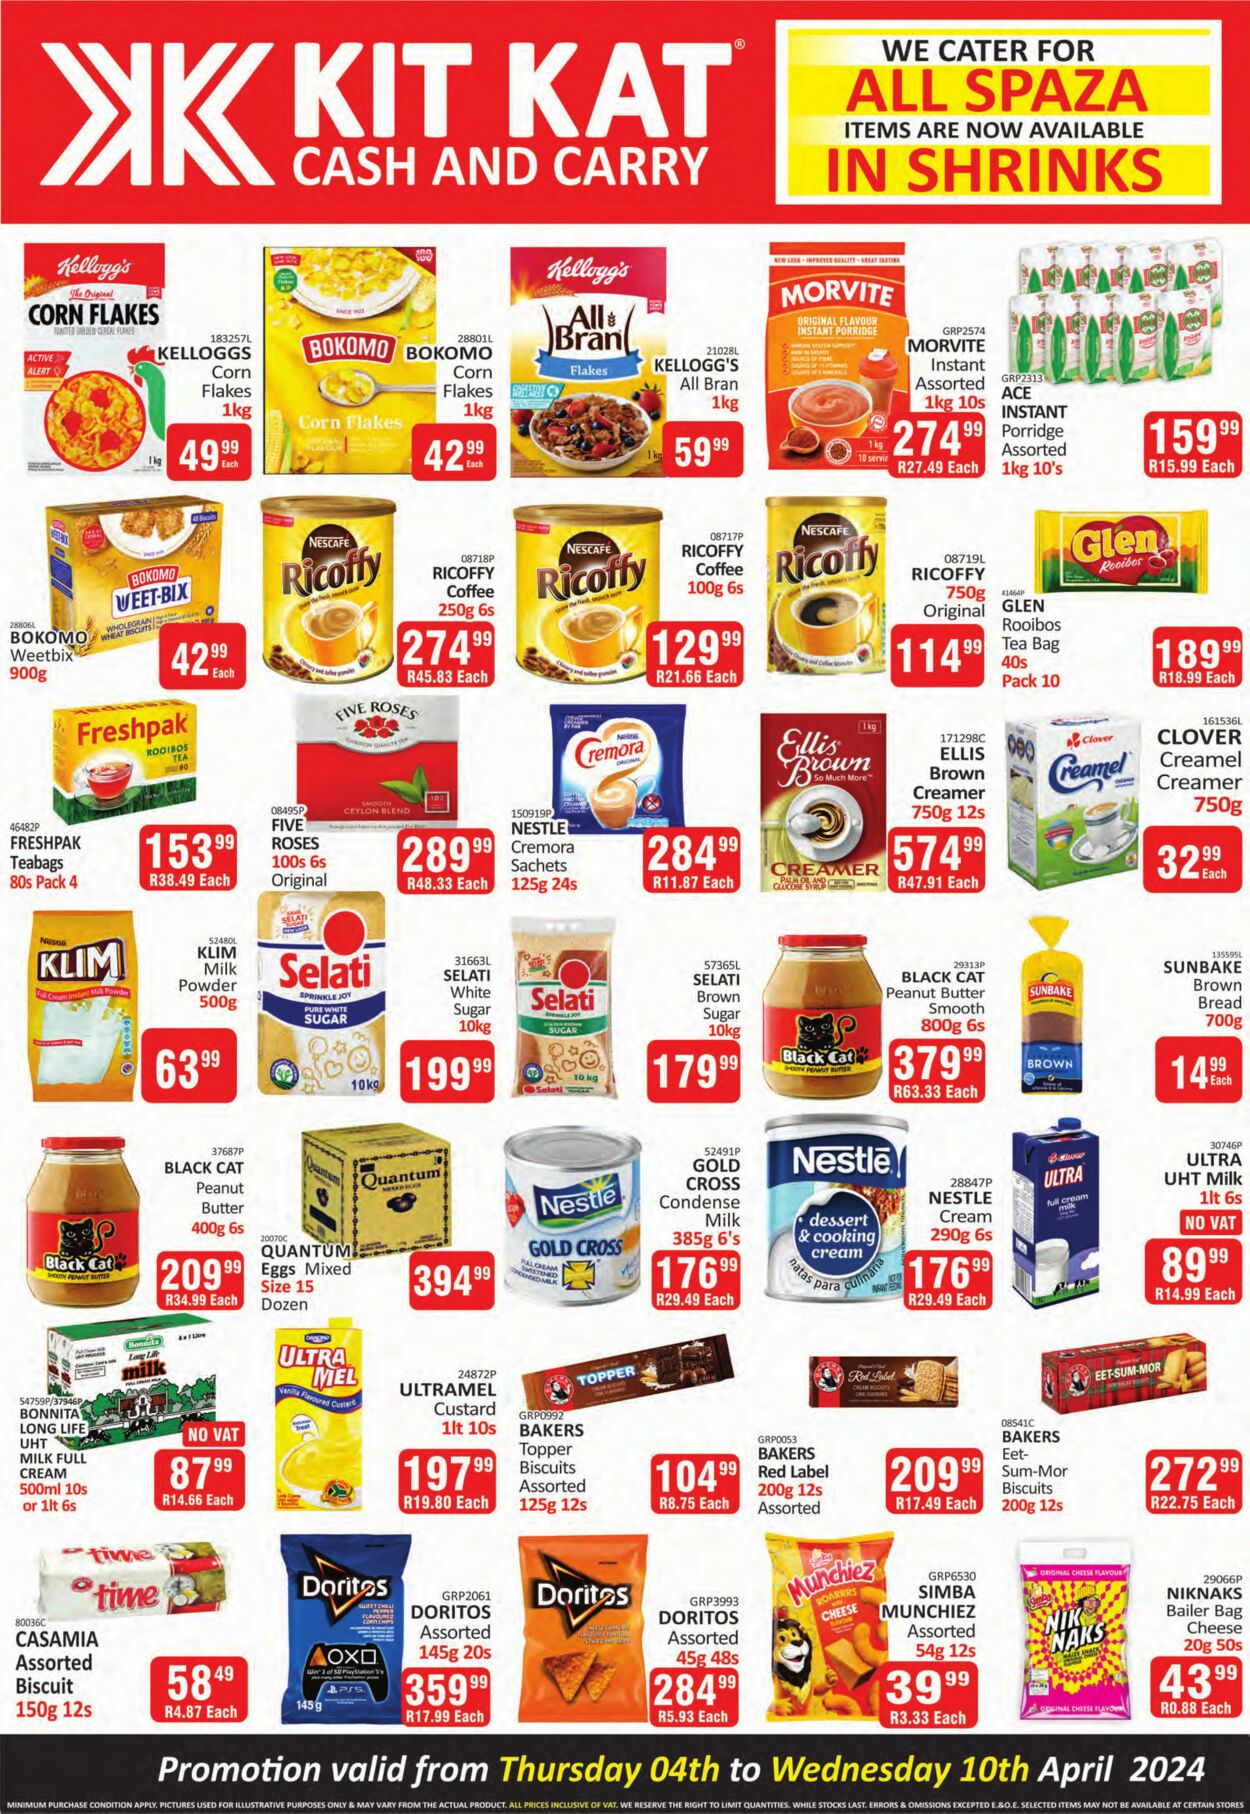 Special Kit Kat Cash and Carry 04.04.2024 - 10.04.2024